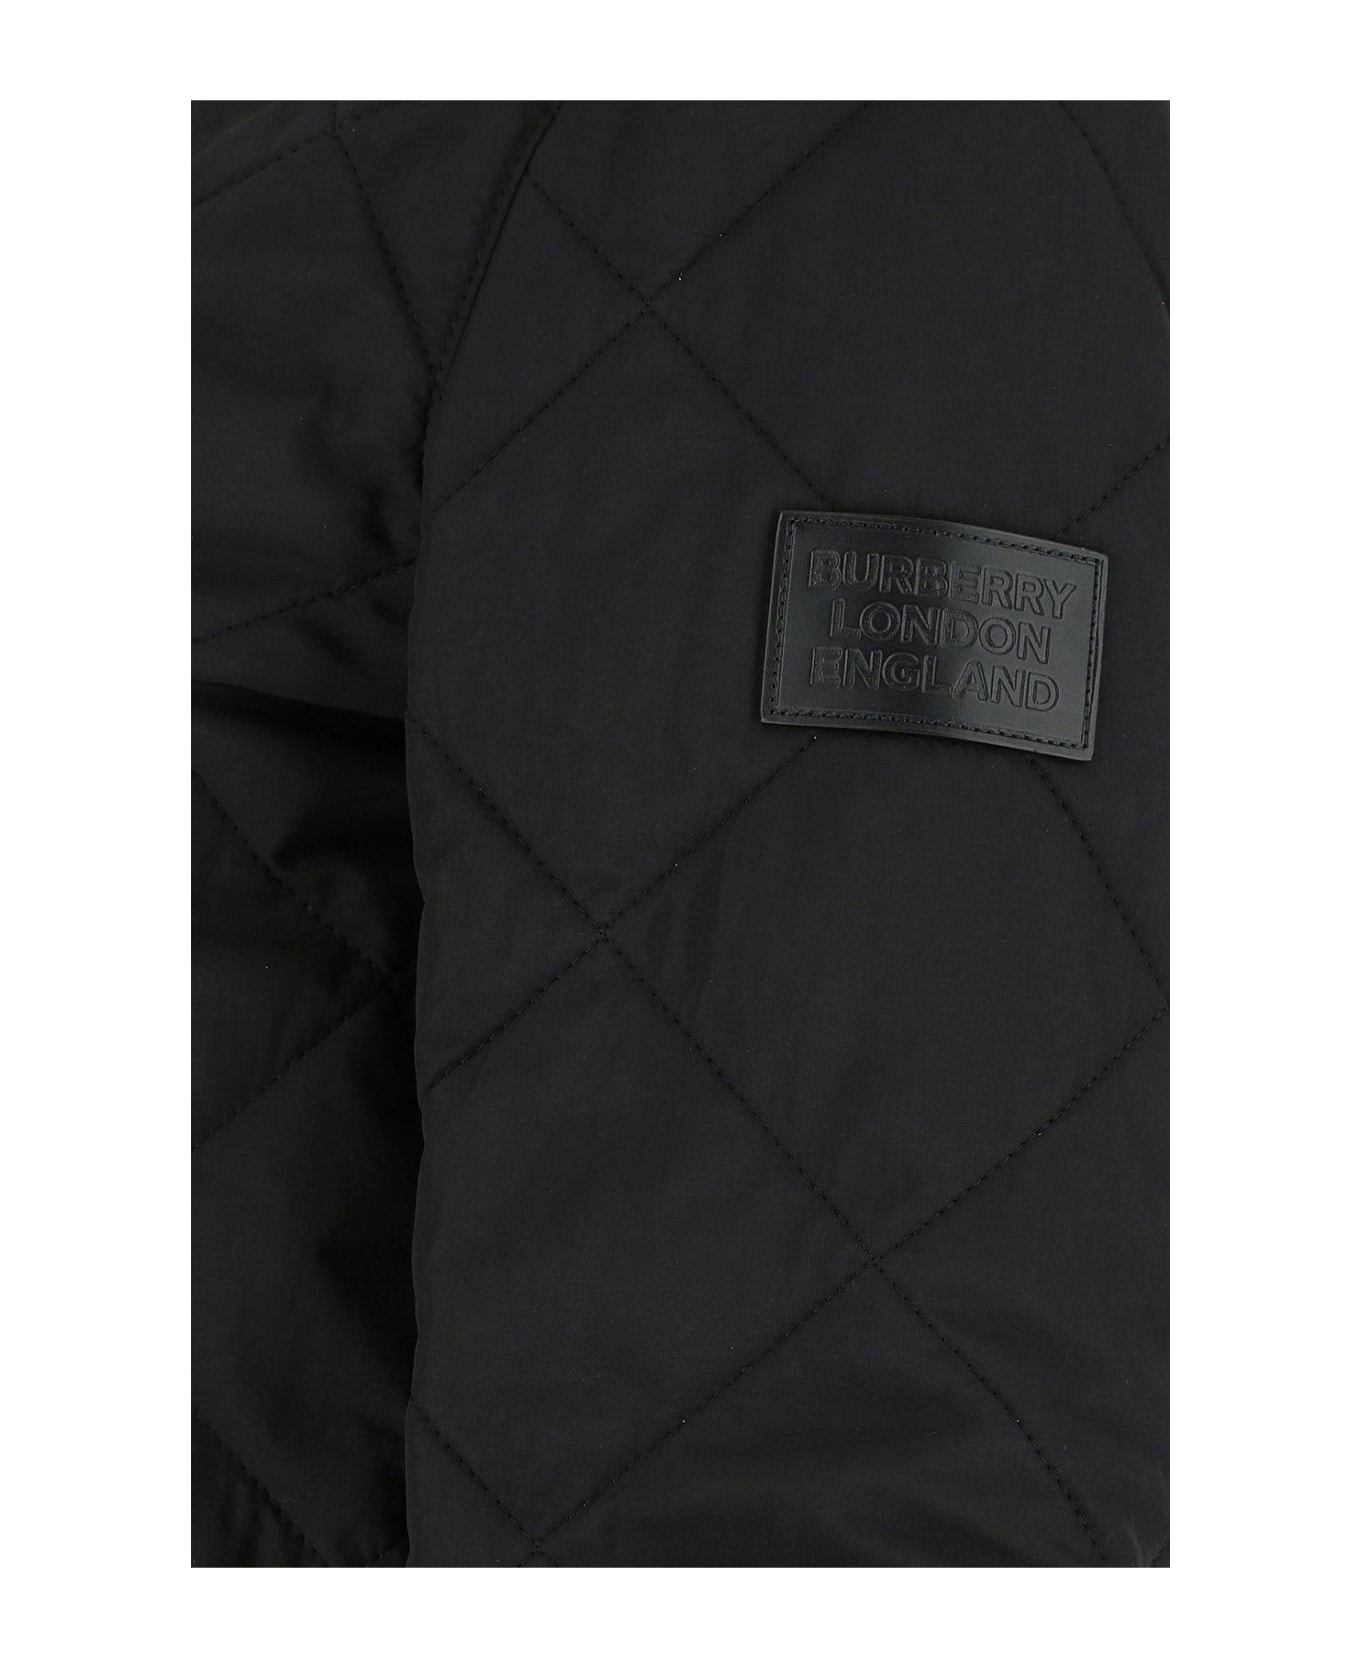 Burberry Quilted Jacket 'country' - Black